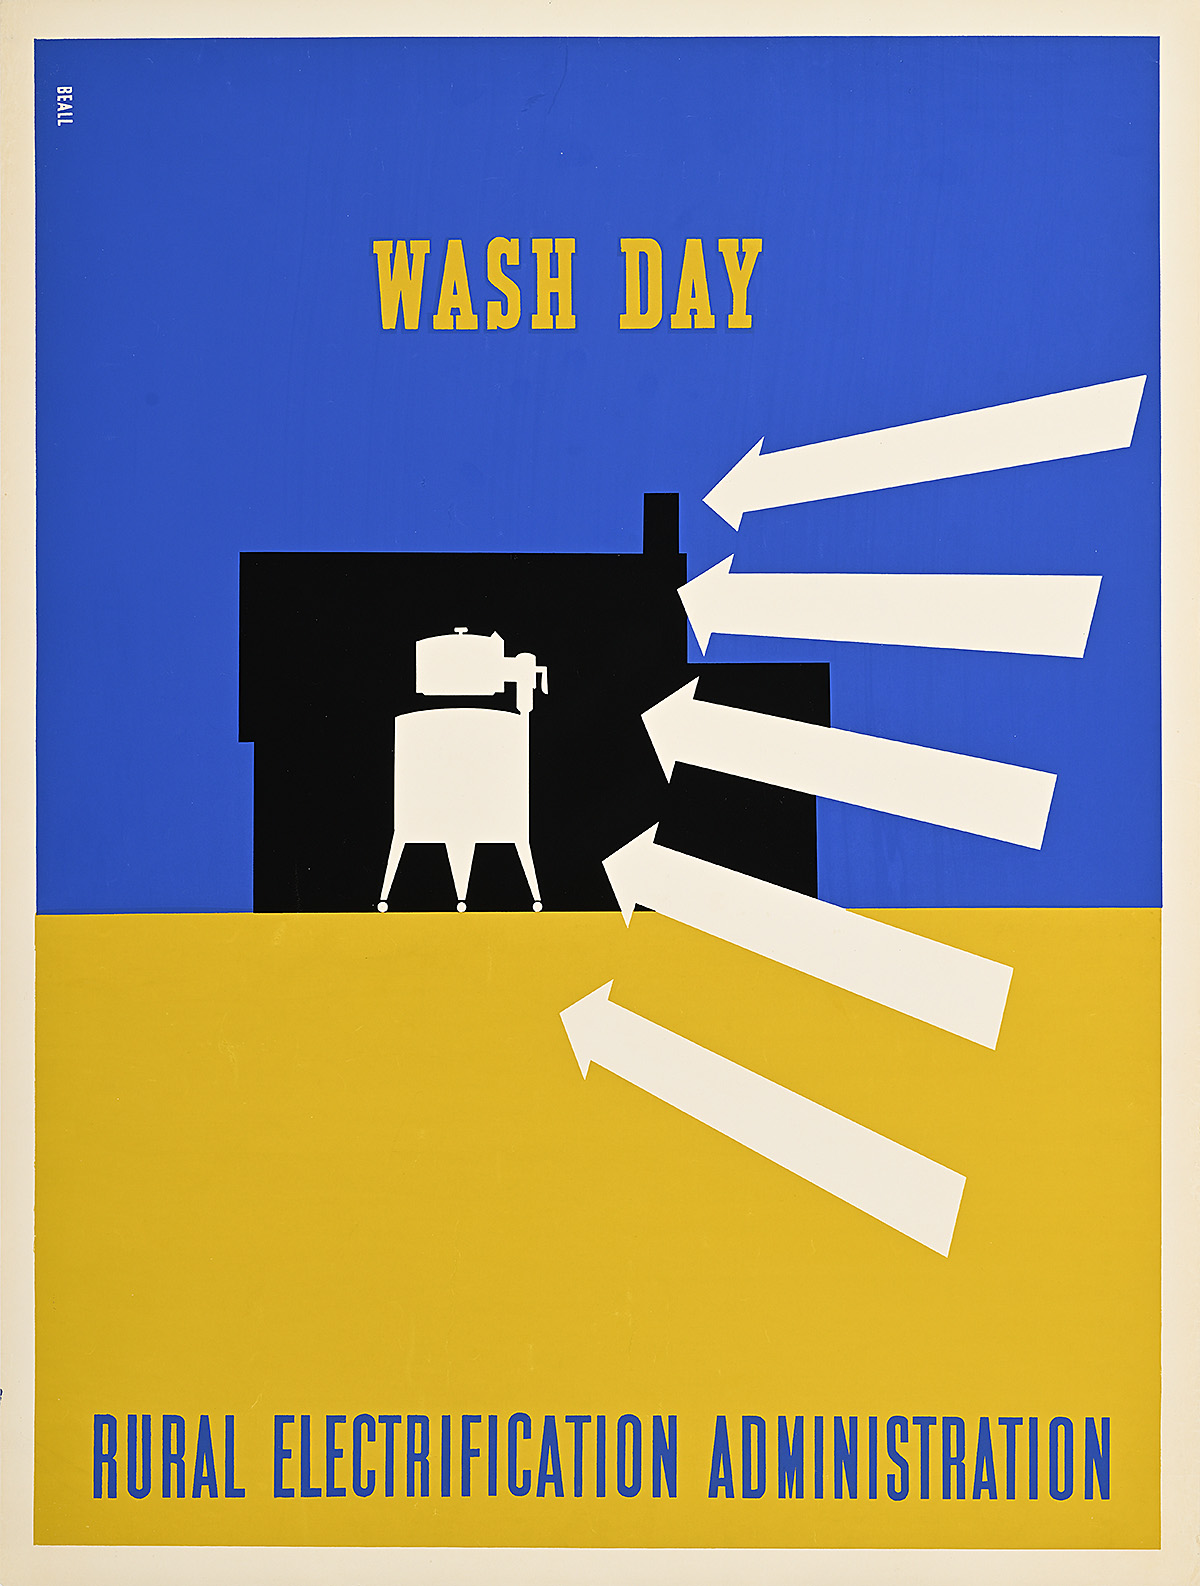 Poster of the silhouette of a washing machine with five arrows pointing to it.